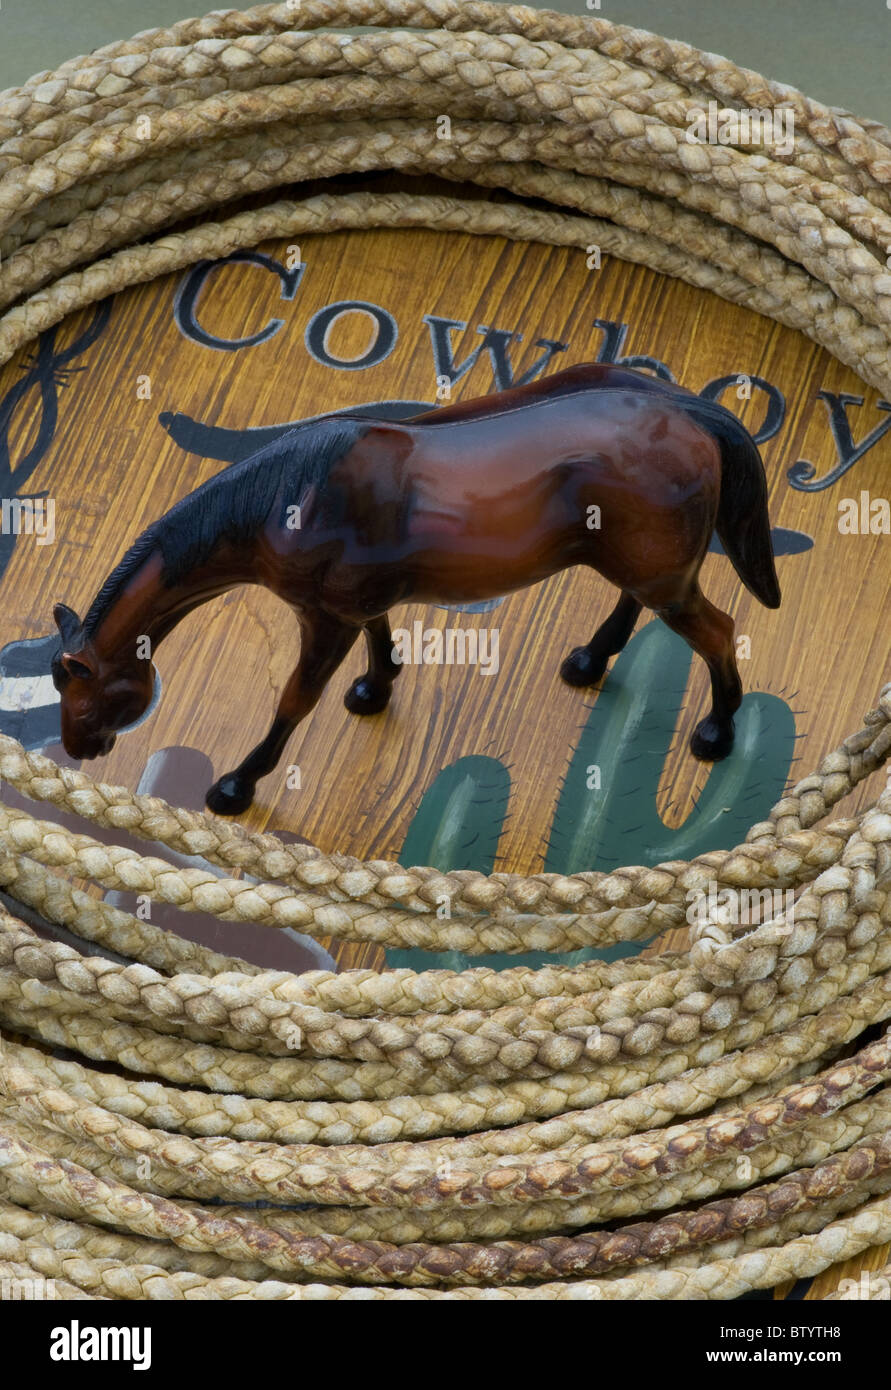 Cowboy sign showing leather lariat rope and toy horse grazing by cactus  Stock Photo - Alamy